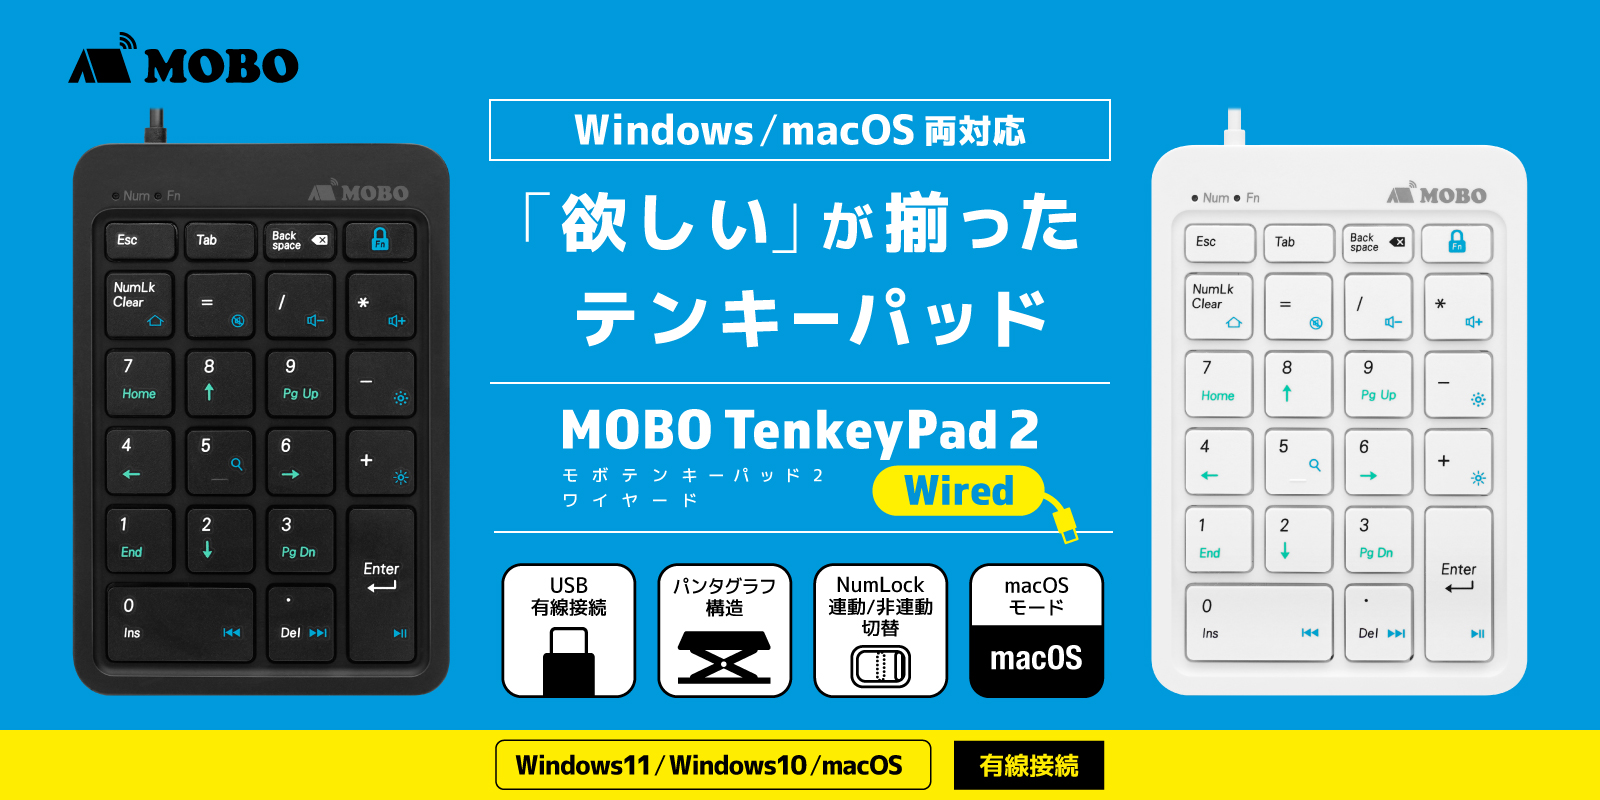 MOBO TenkeyPad 2 Wired